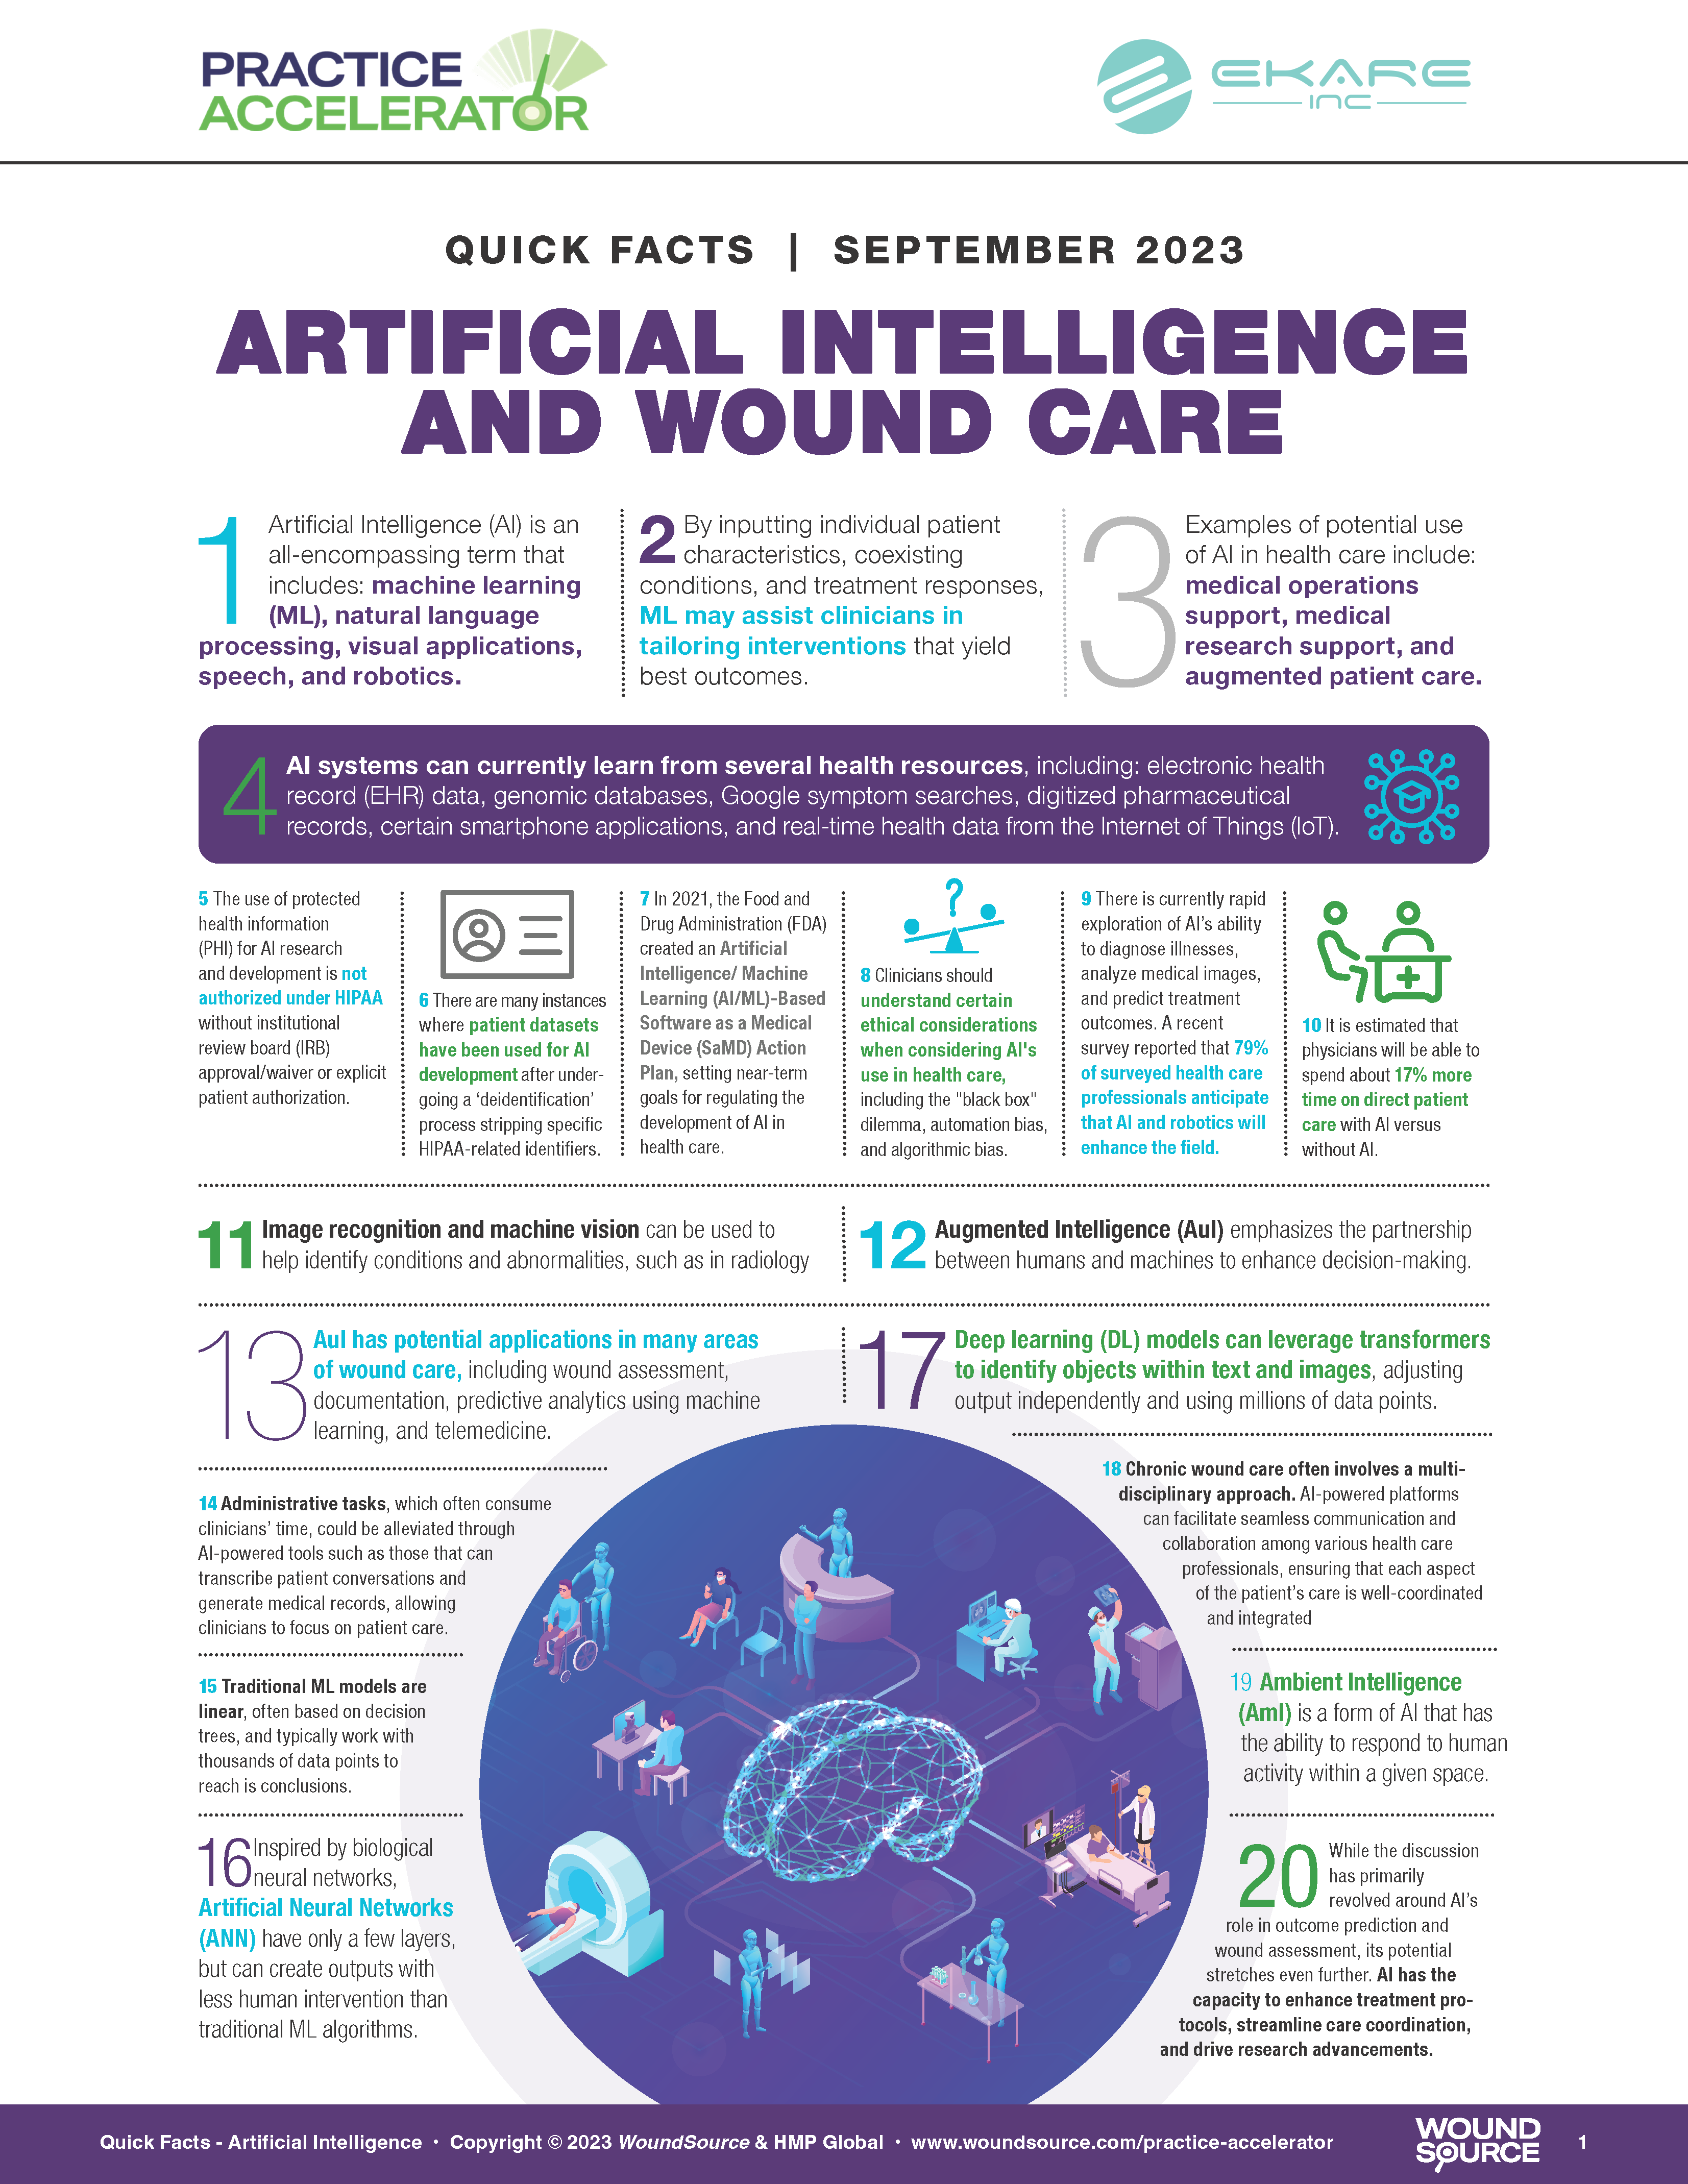 Quick Facts - Artificial Intelligence and Wound Care